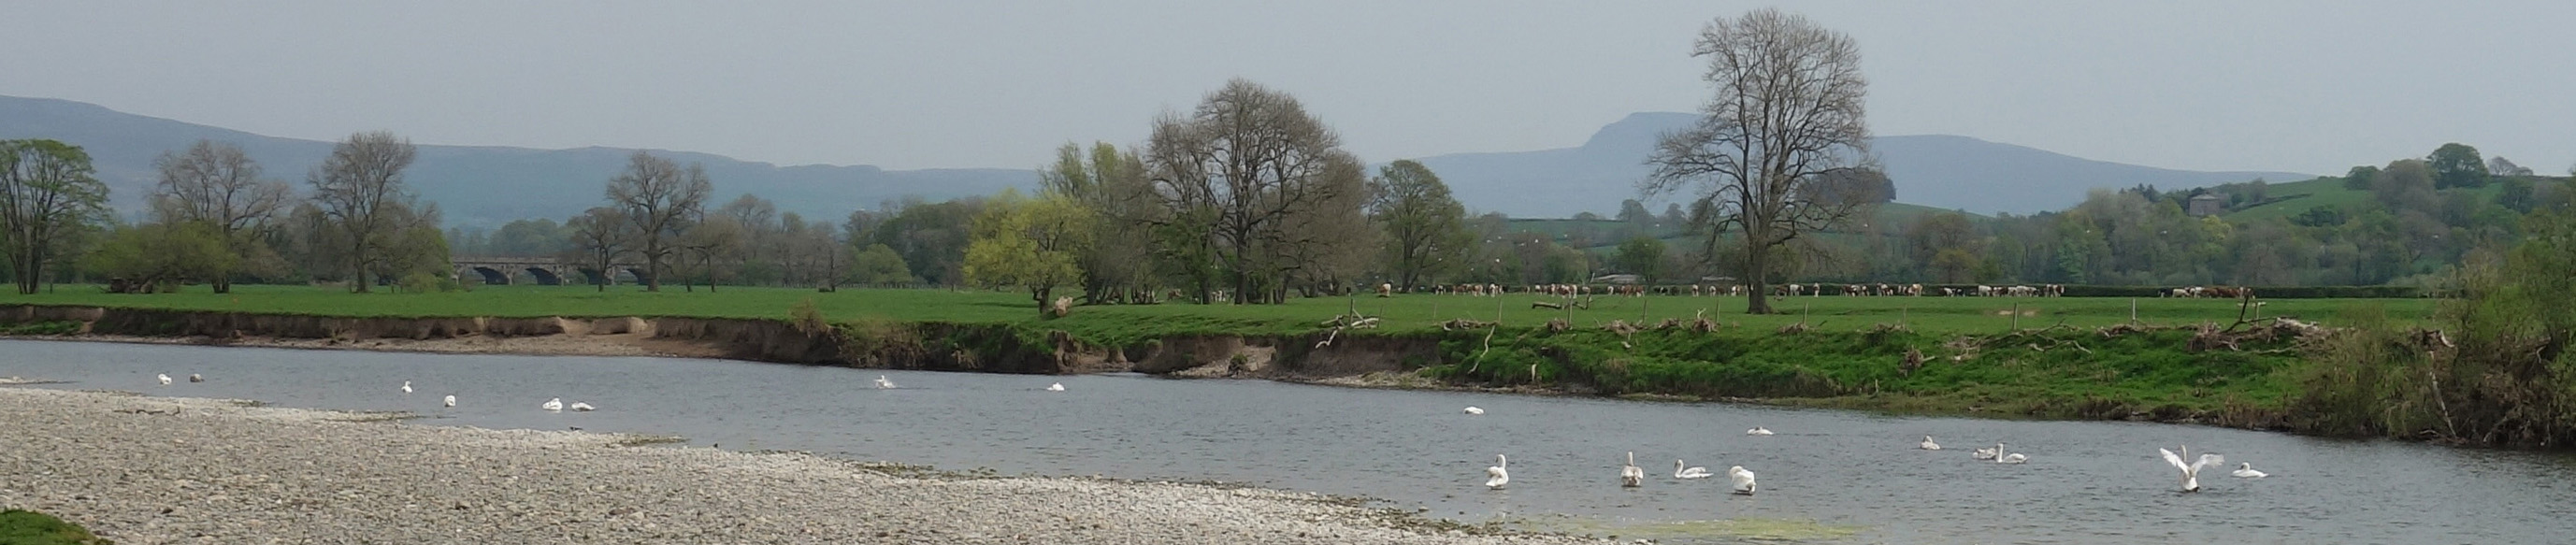 swans on Lune